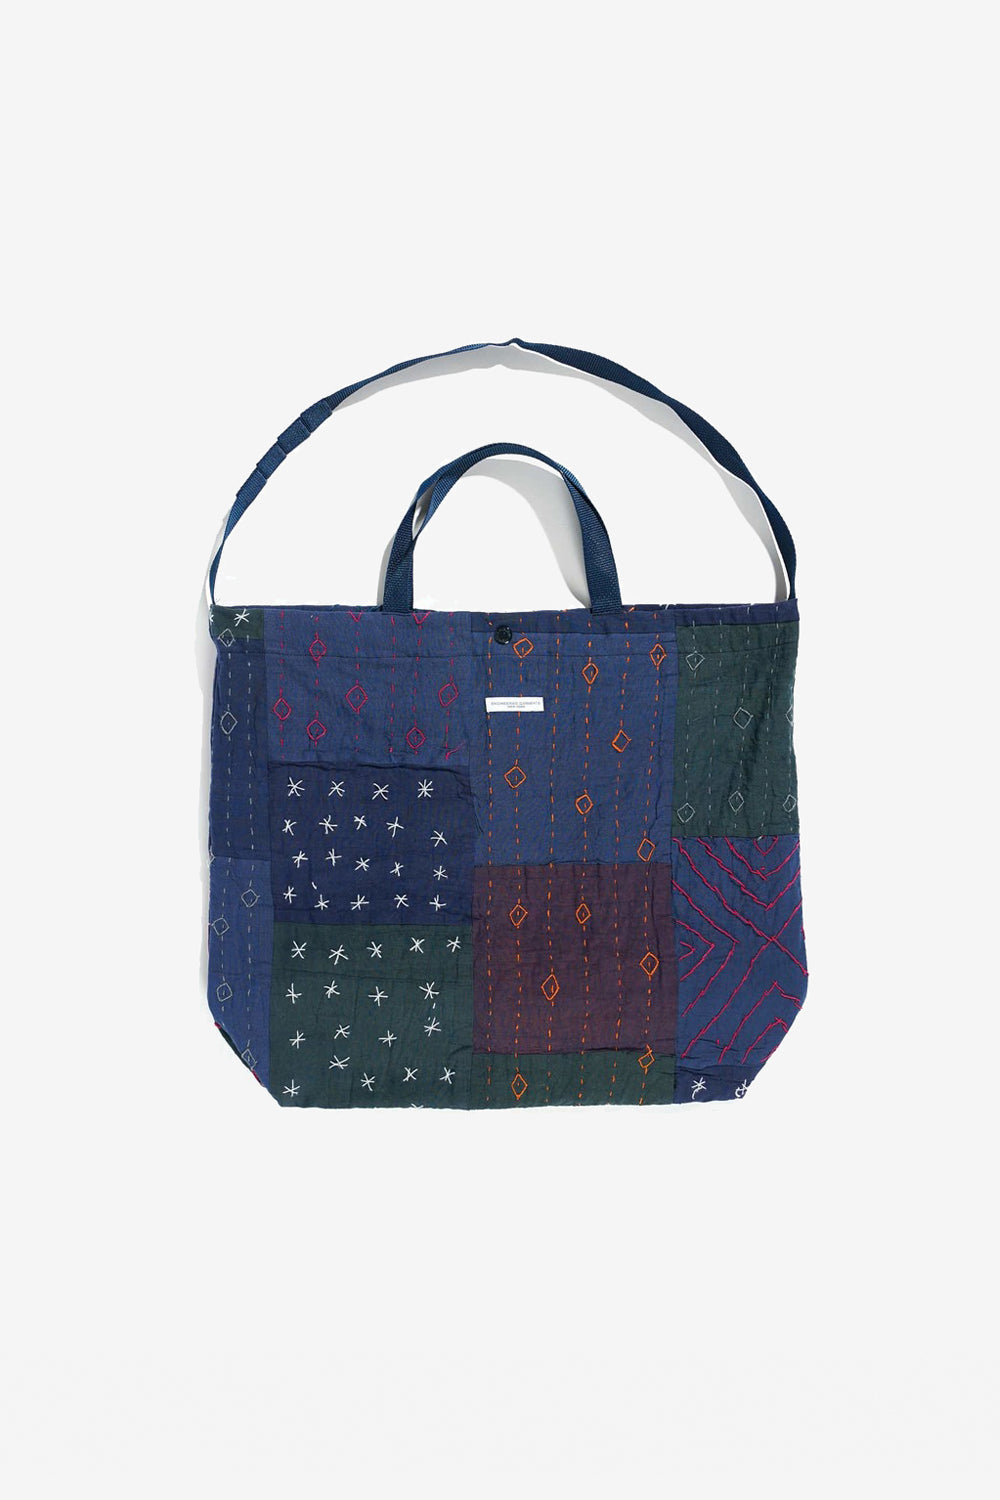 Engineered Garments Carry All Tote (Navy Square Handstitch)